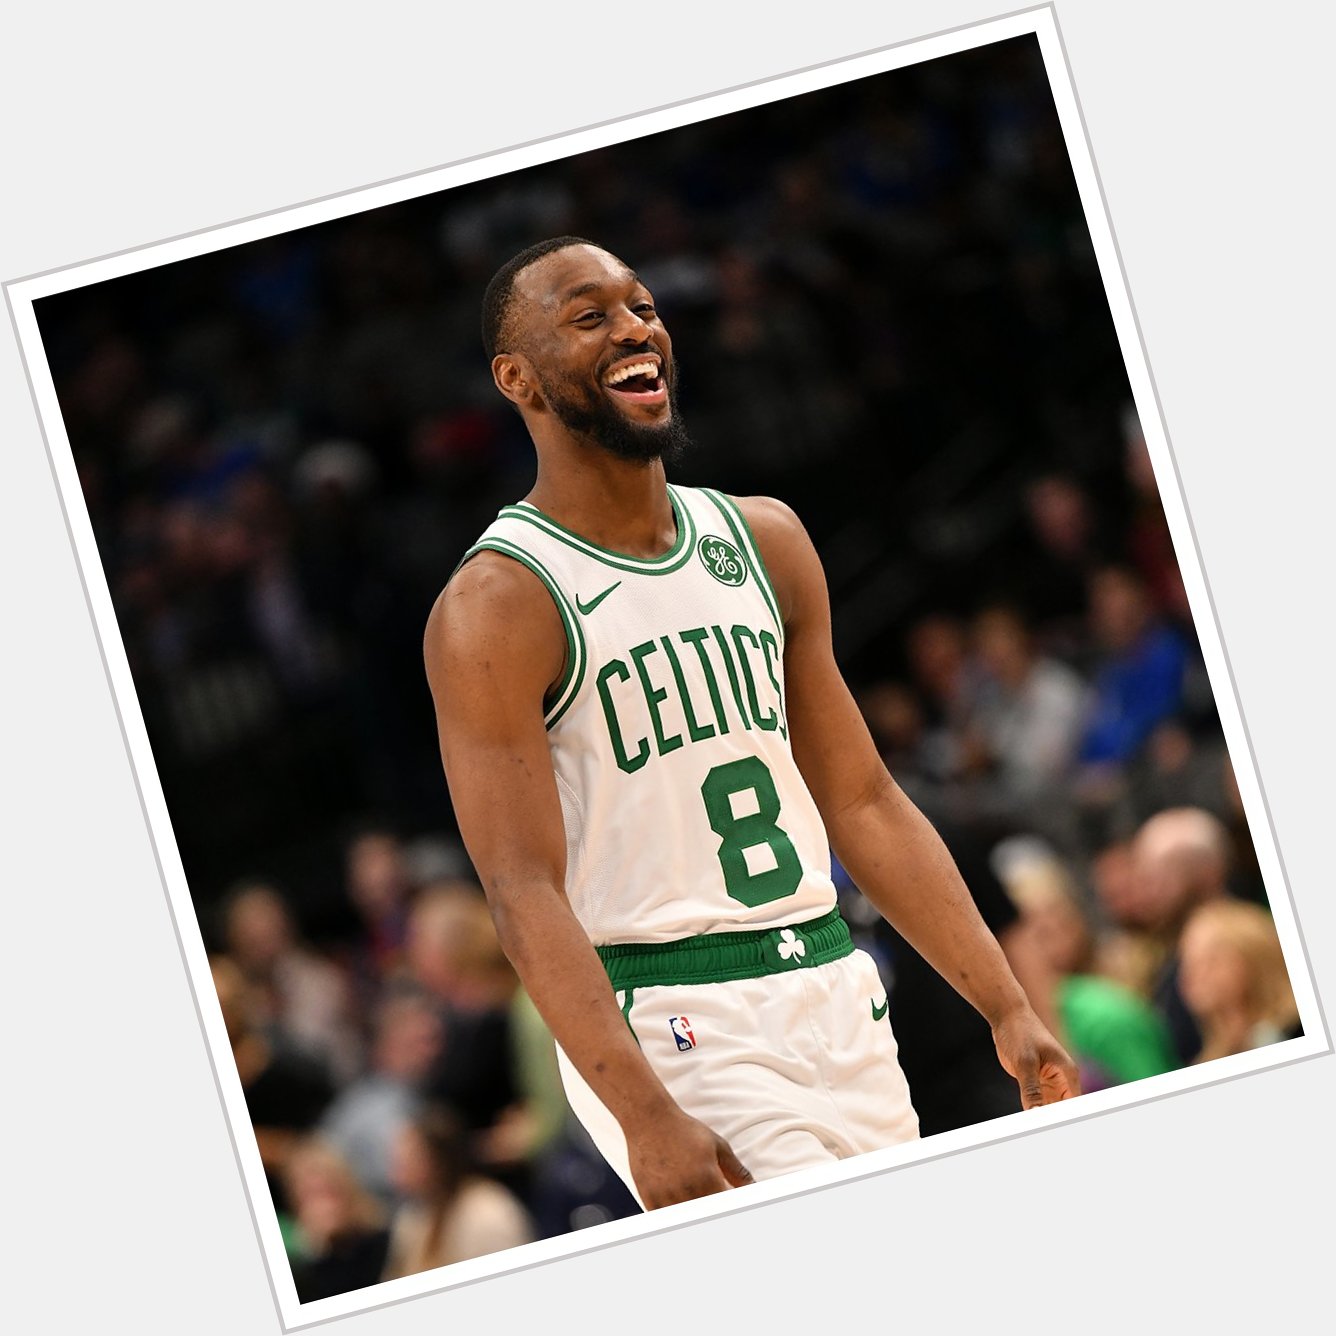 Happy Birthday to 4x NBA All-Star Kemba Walker of the Boston Celtics!

Shop his collection:  